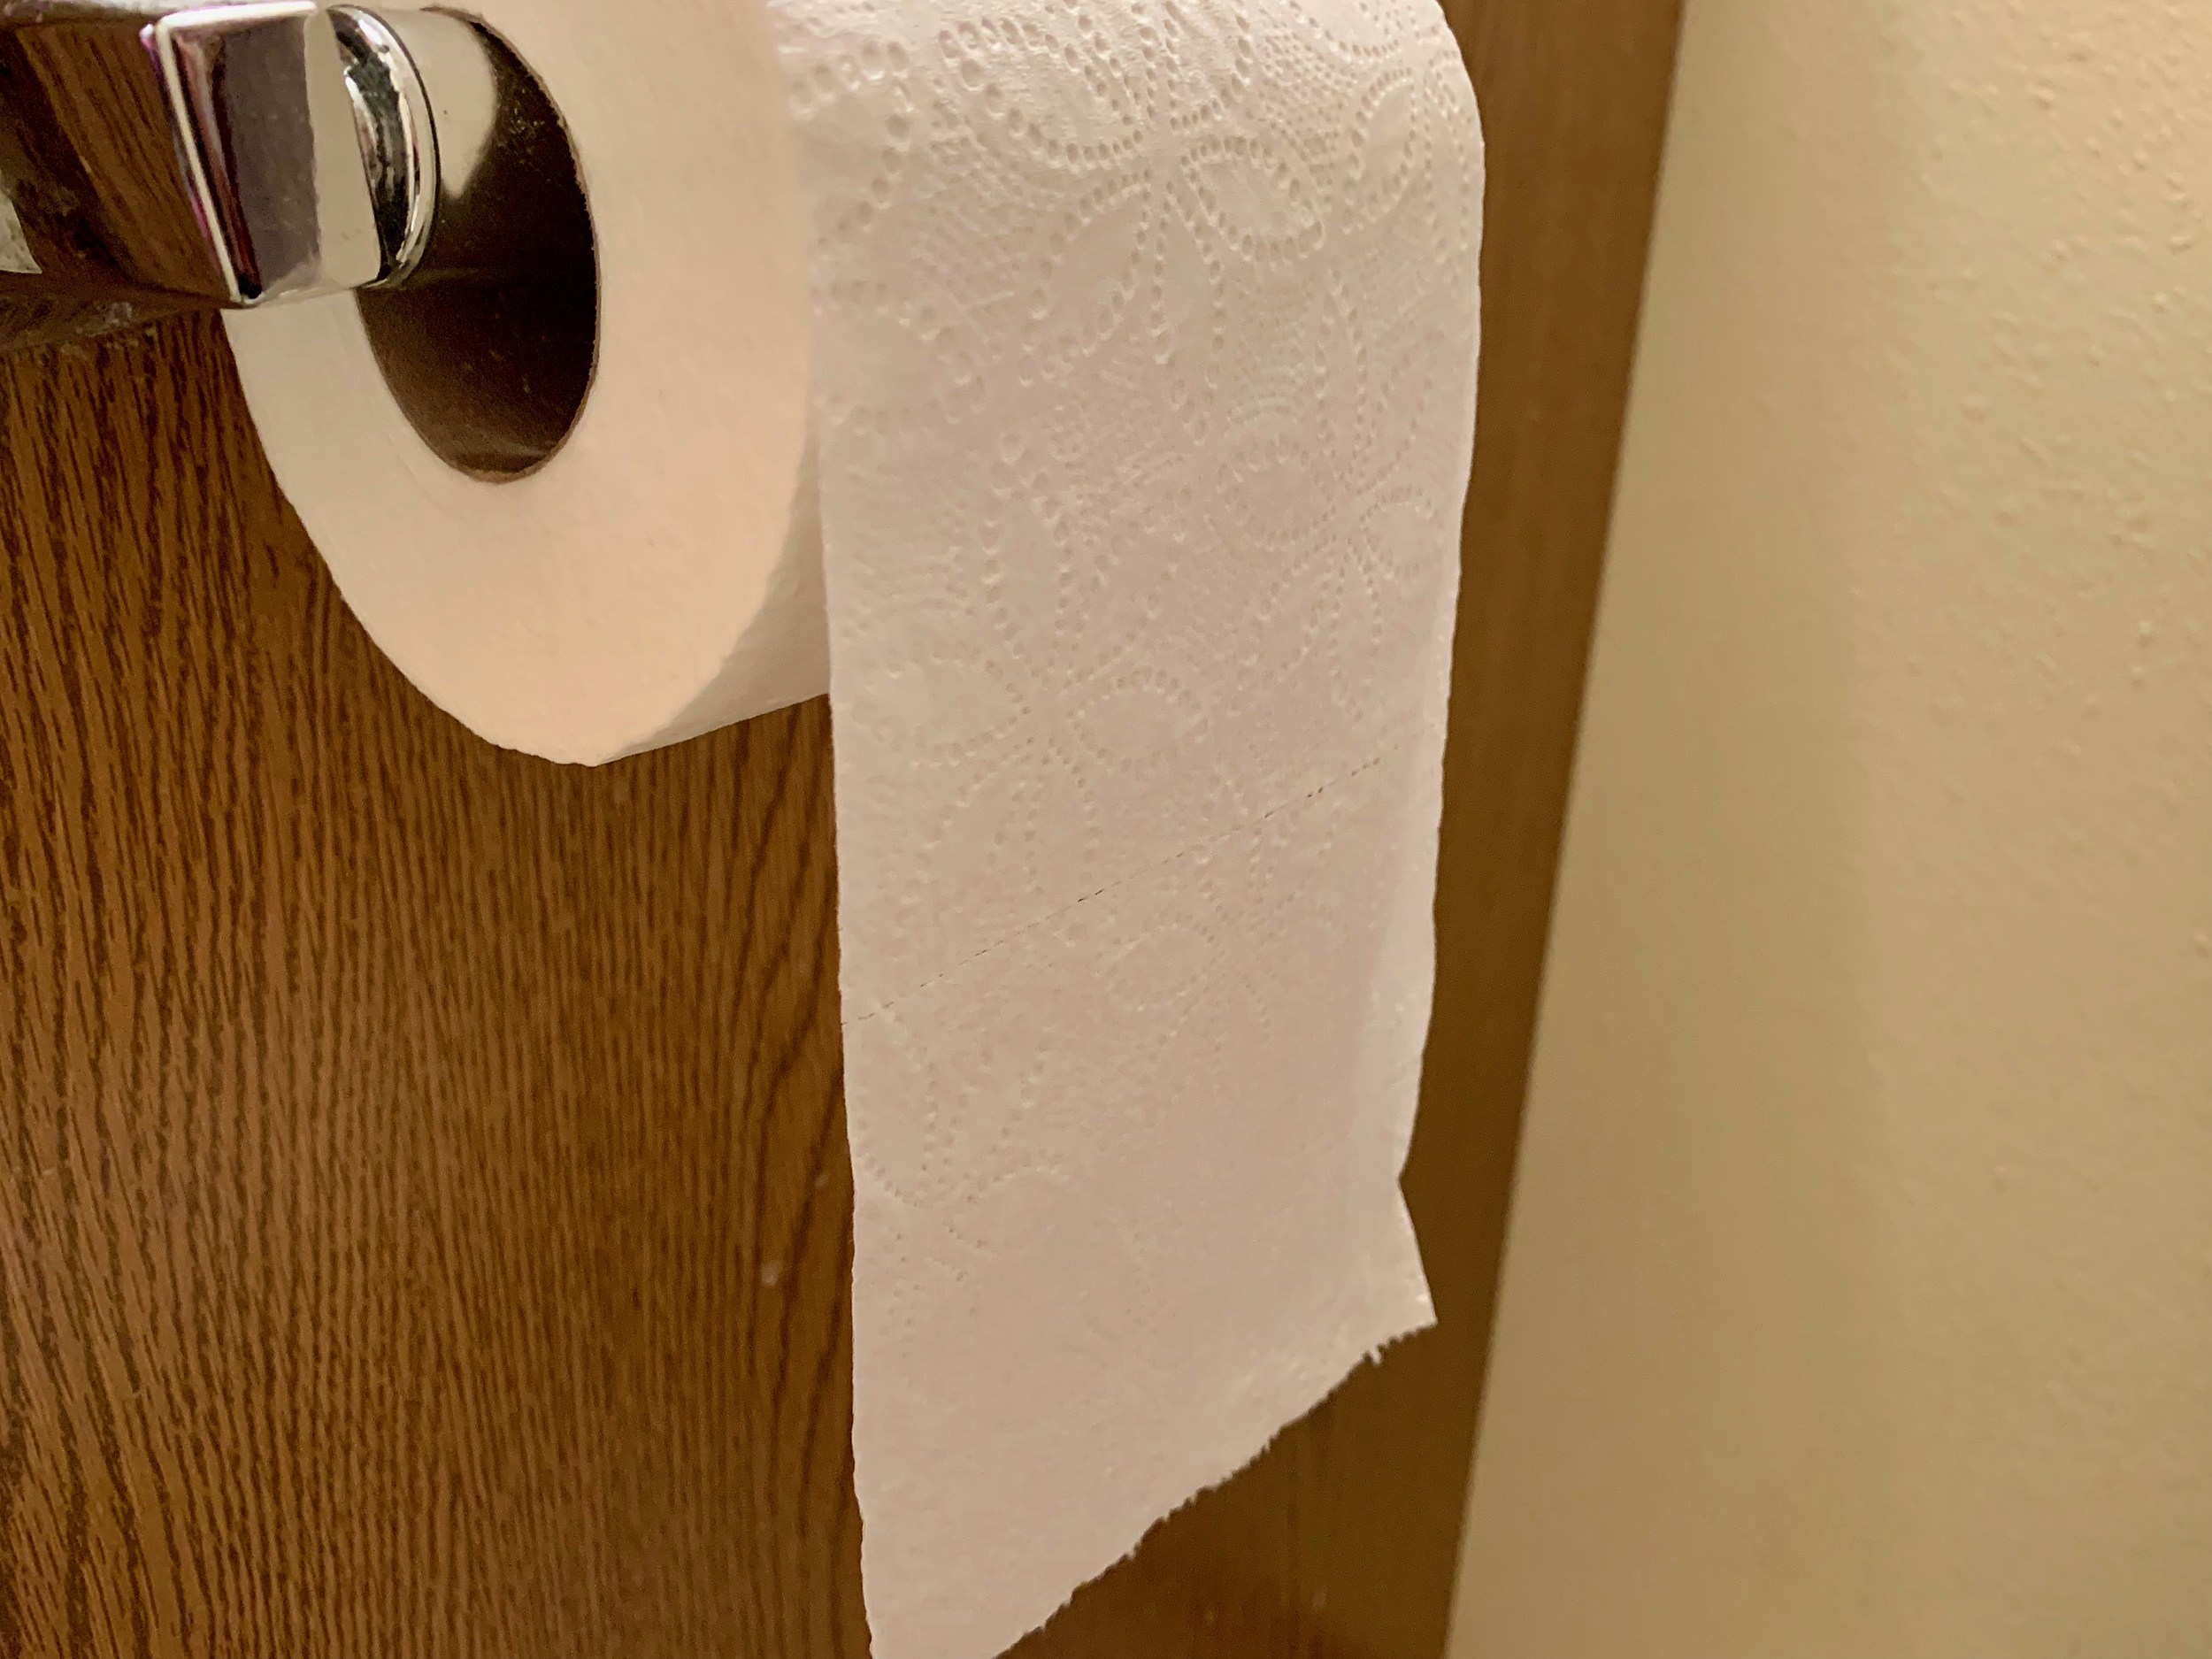 Toilet Paper Roll Battle Settled by 128 Year Old Manual